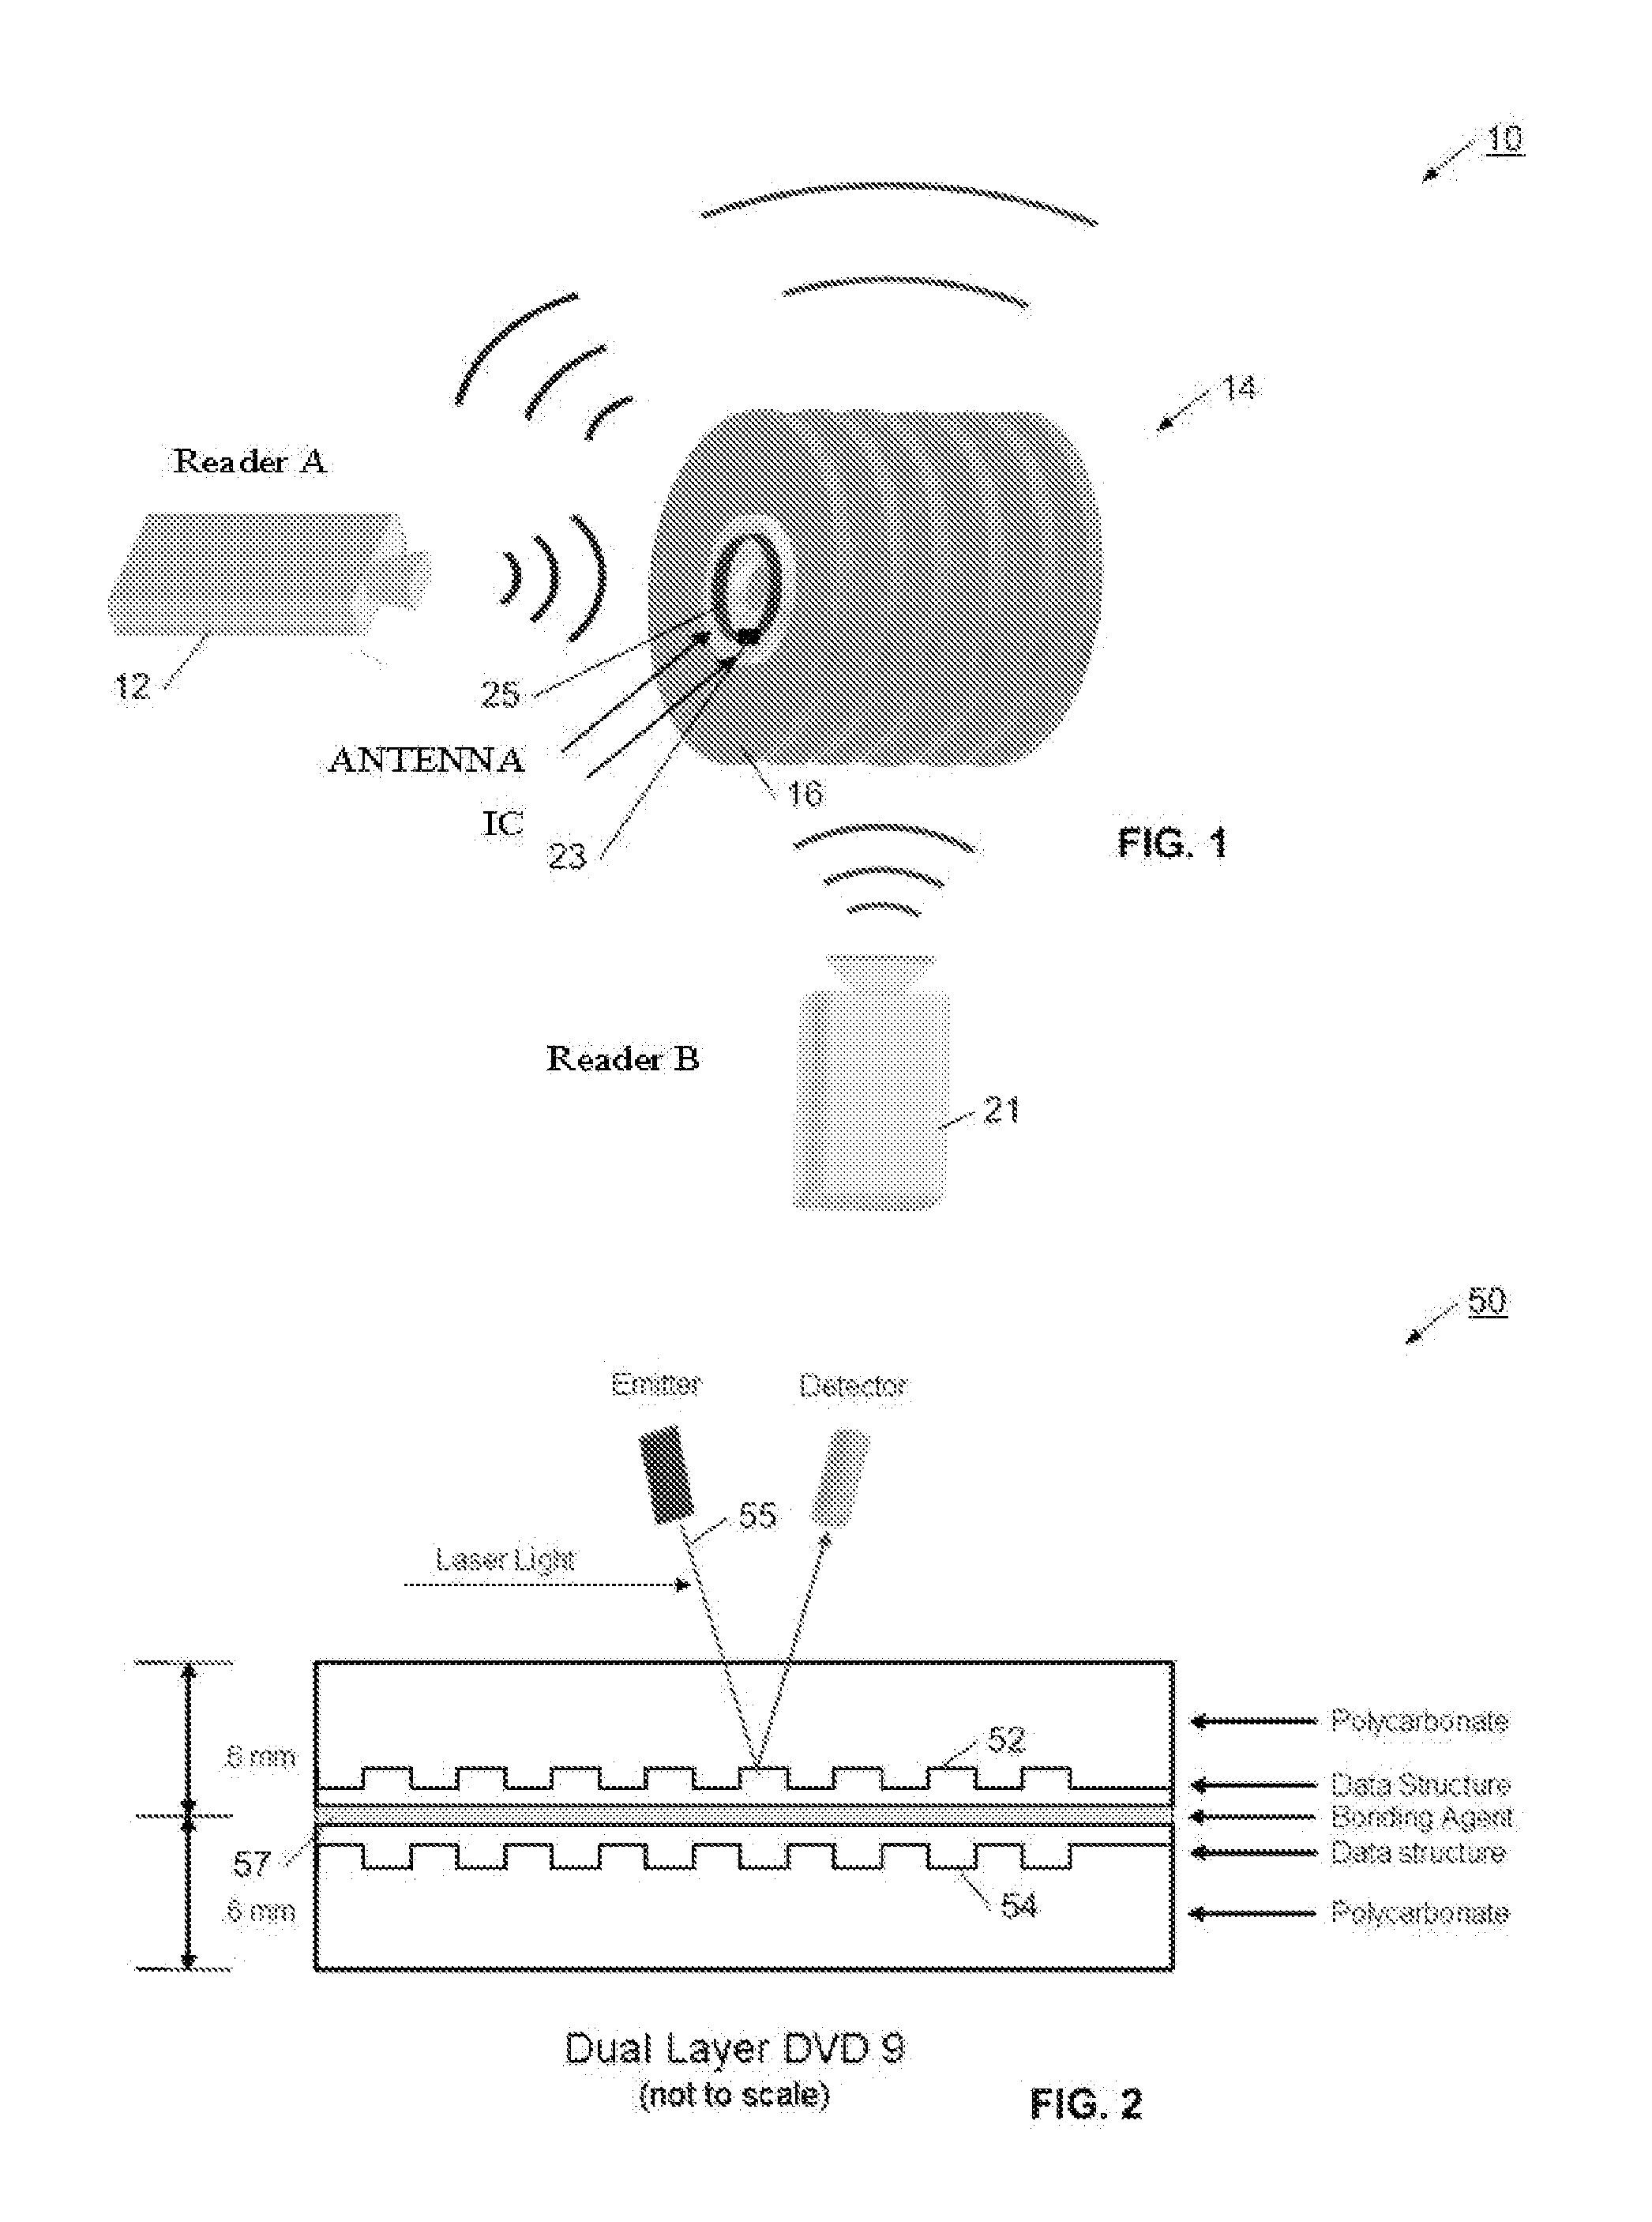 Antenna devices and processes for improved RF communication with target devices